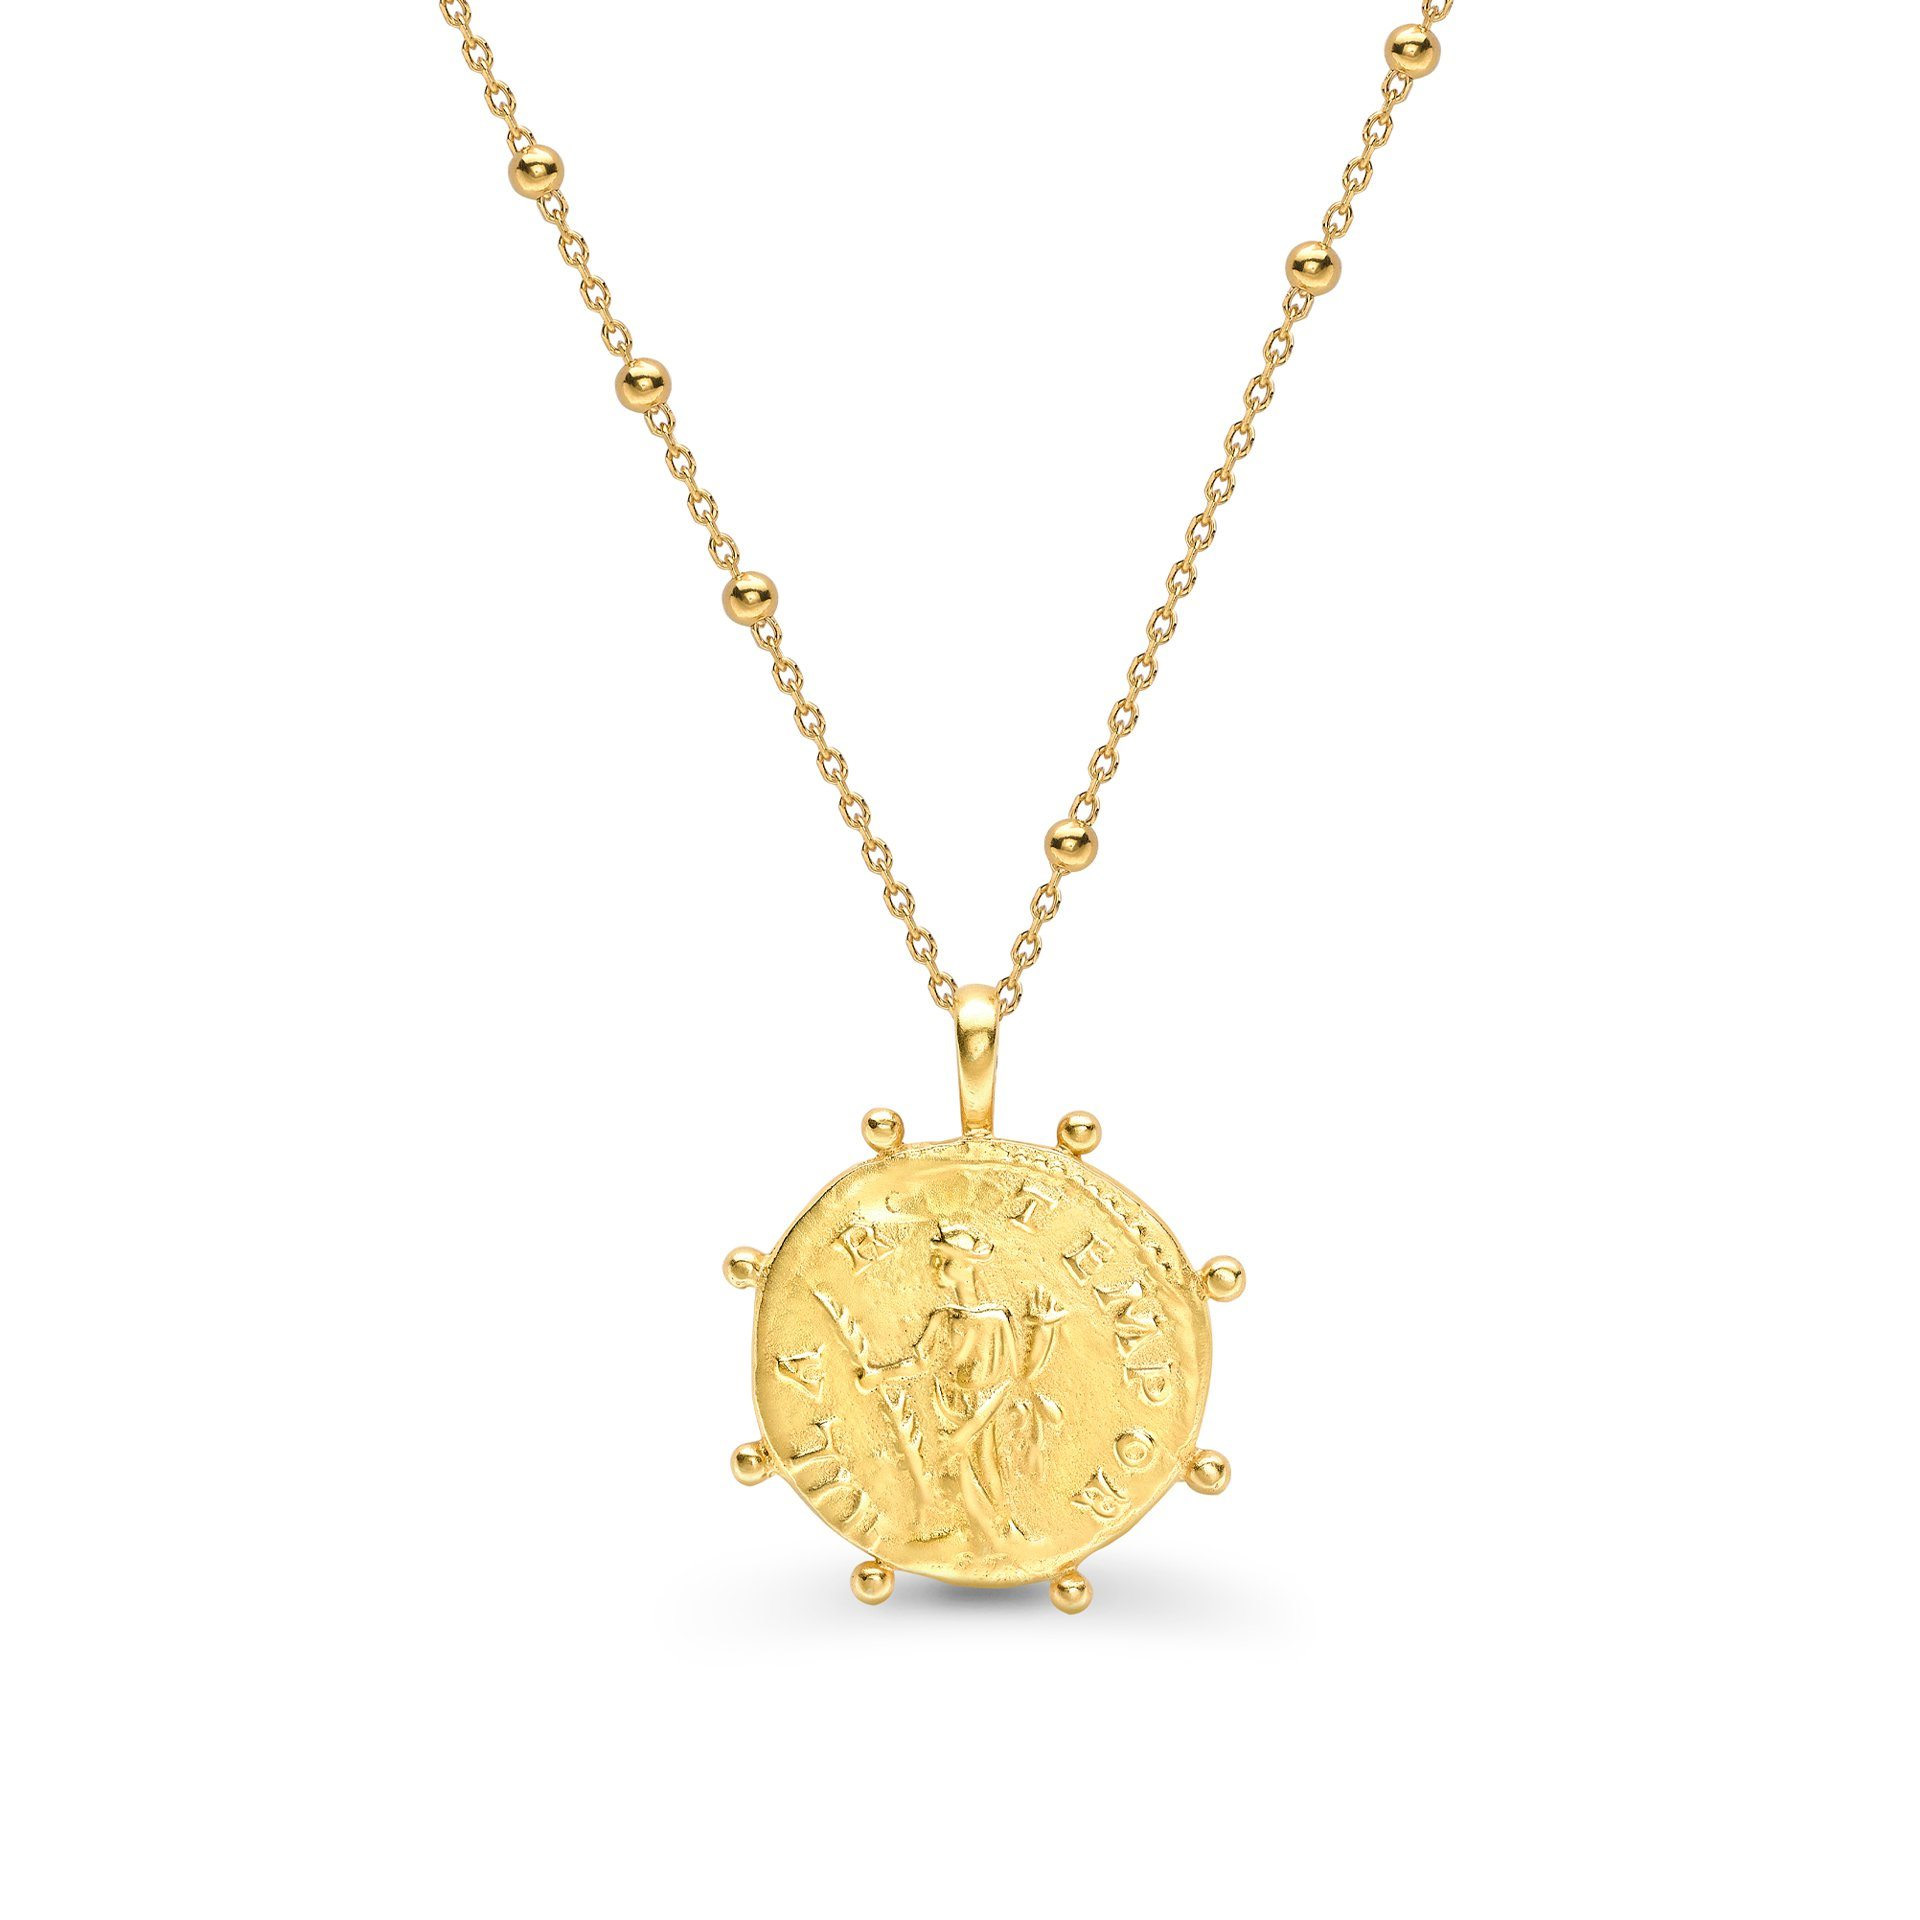 Wholesale OEM/ODM Jewelry 18ct gold-vermeil necklace with Roman coin on a beaded chain silver jewelry